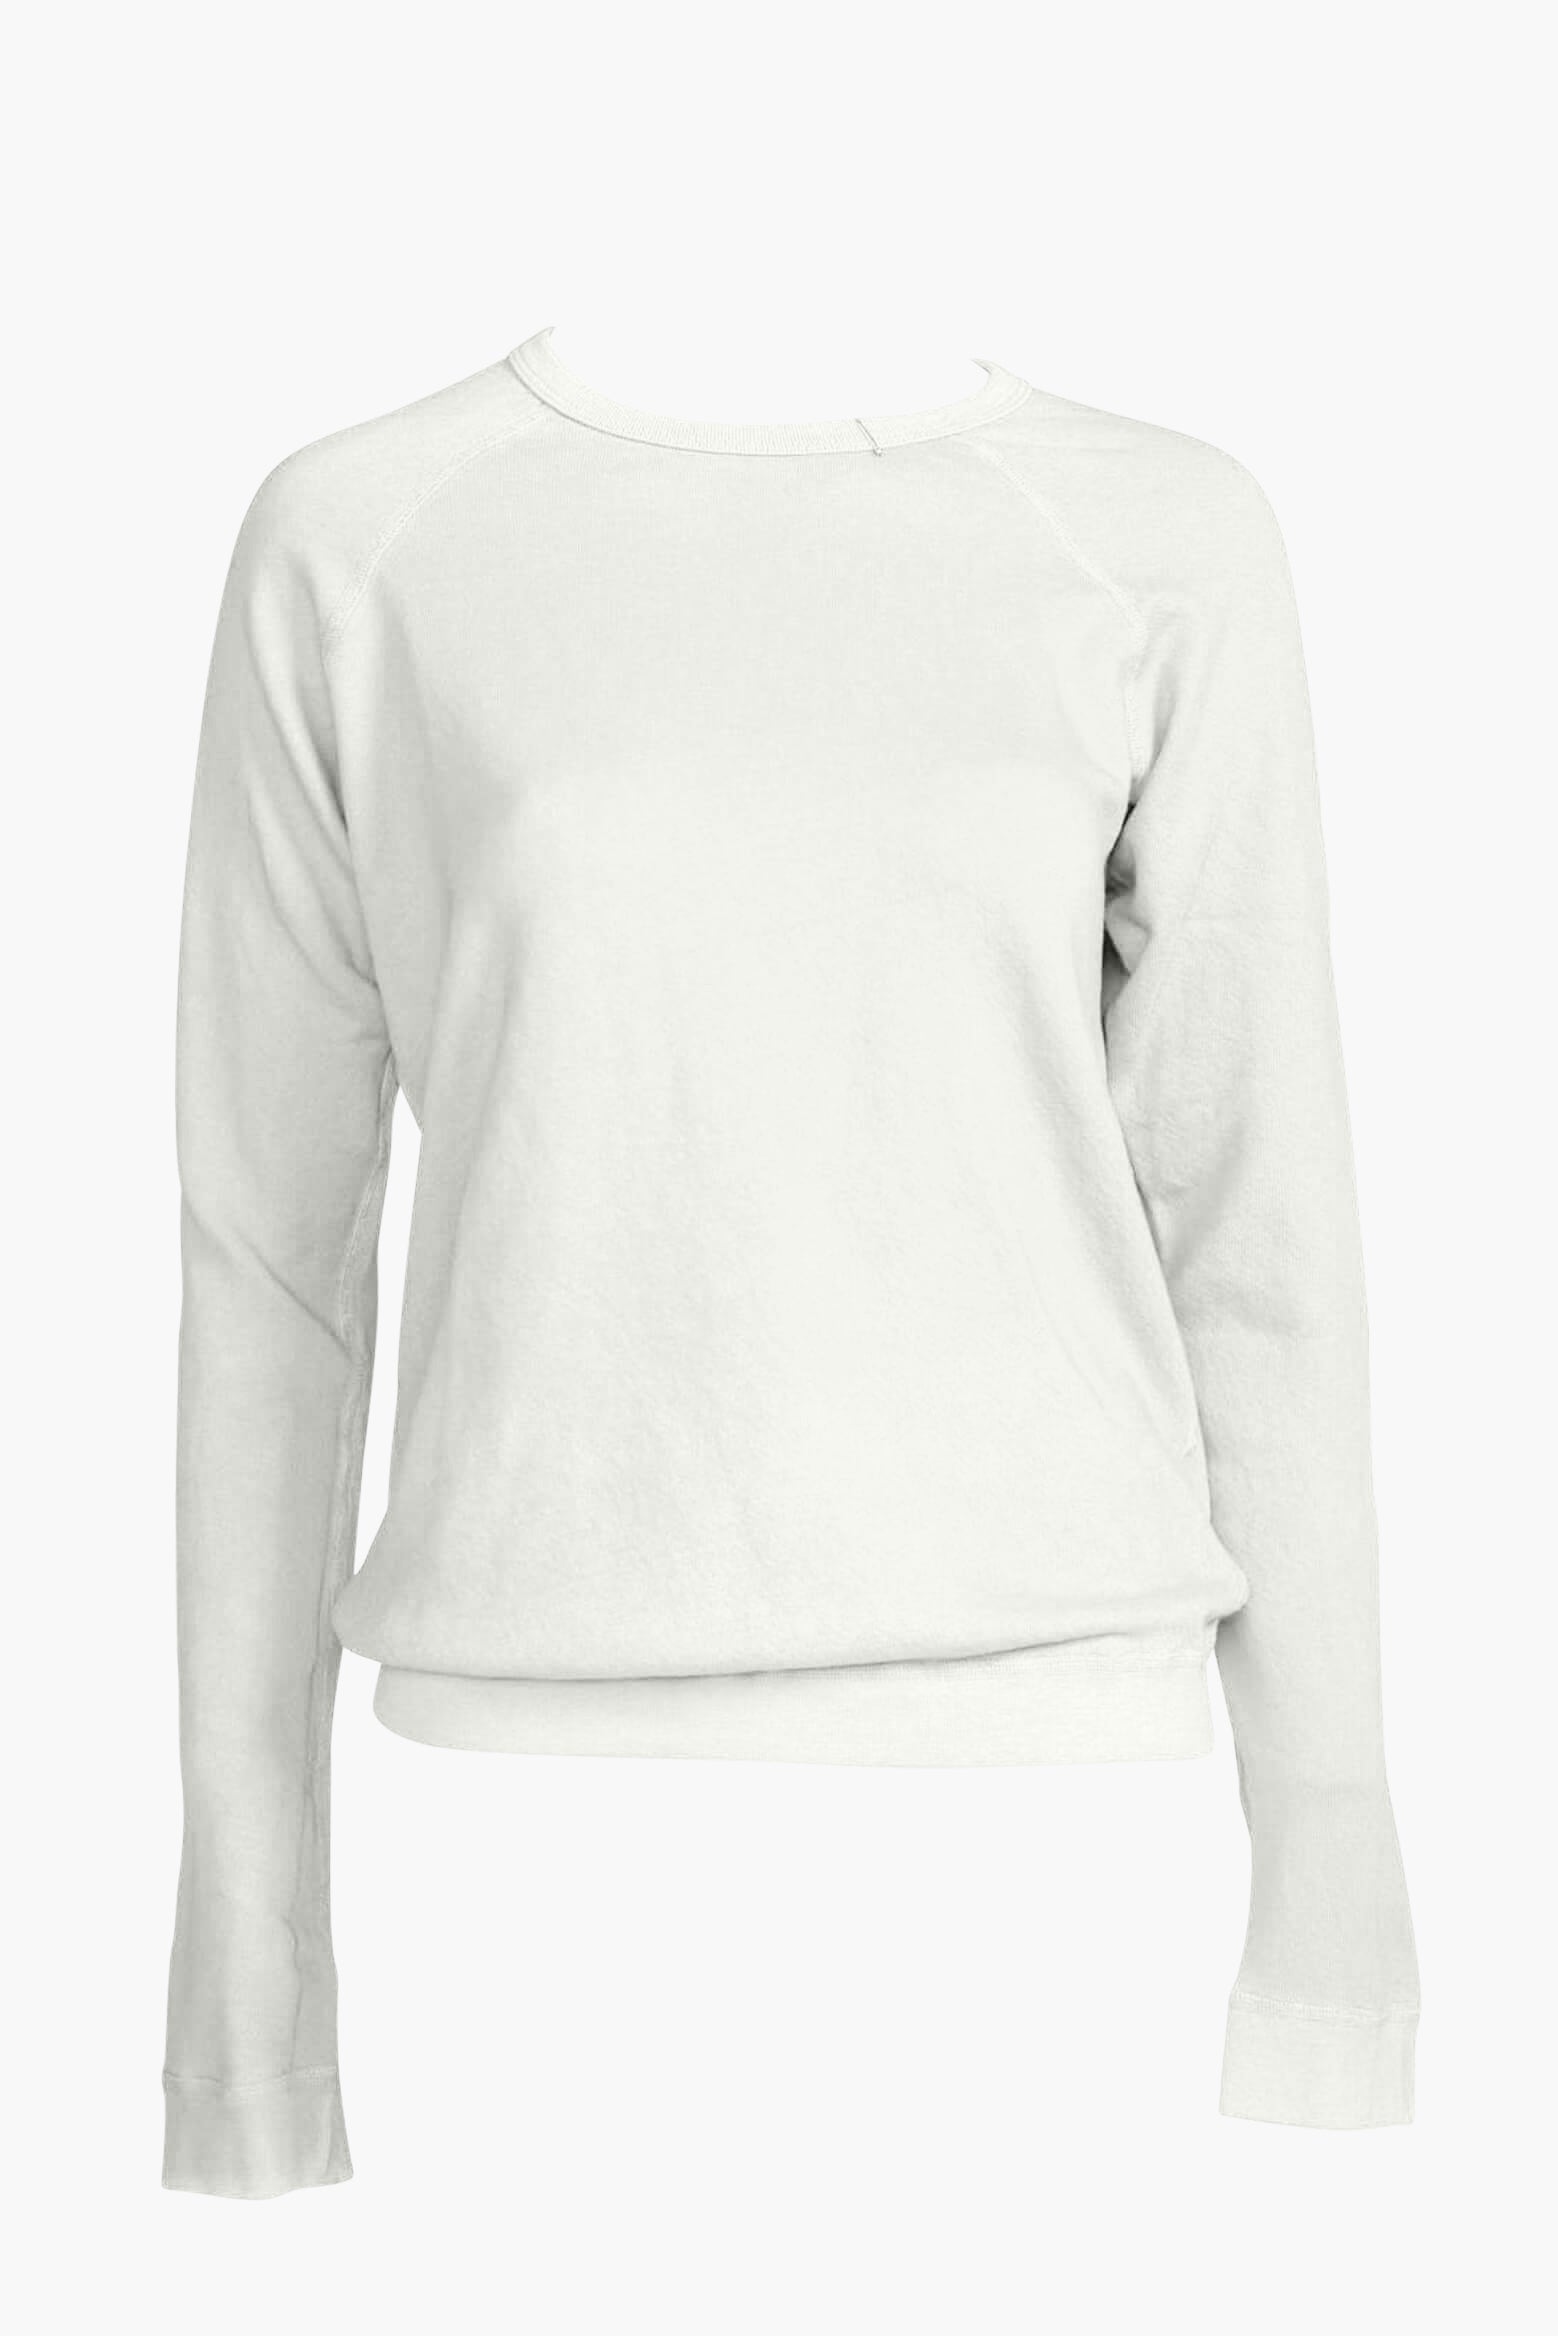 Free City Lucky Rabbits Sweatshirt in Yummy Rabbit available at TNT The New Trend Australia